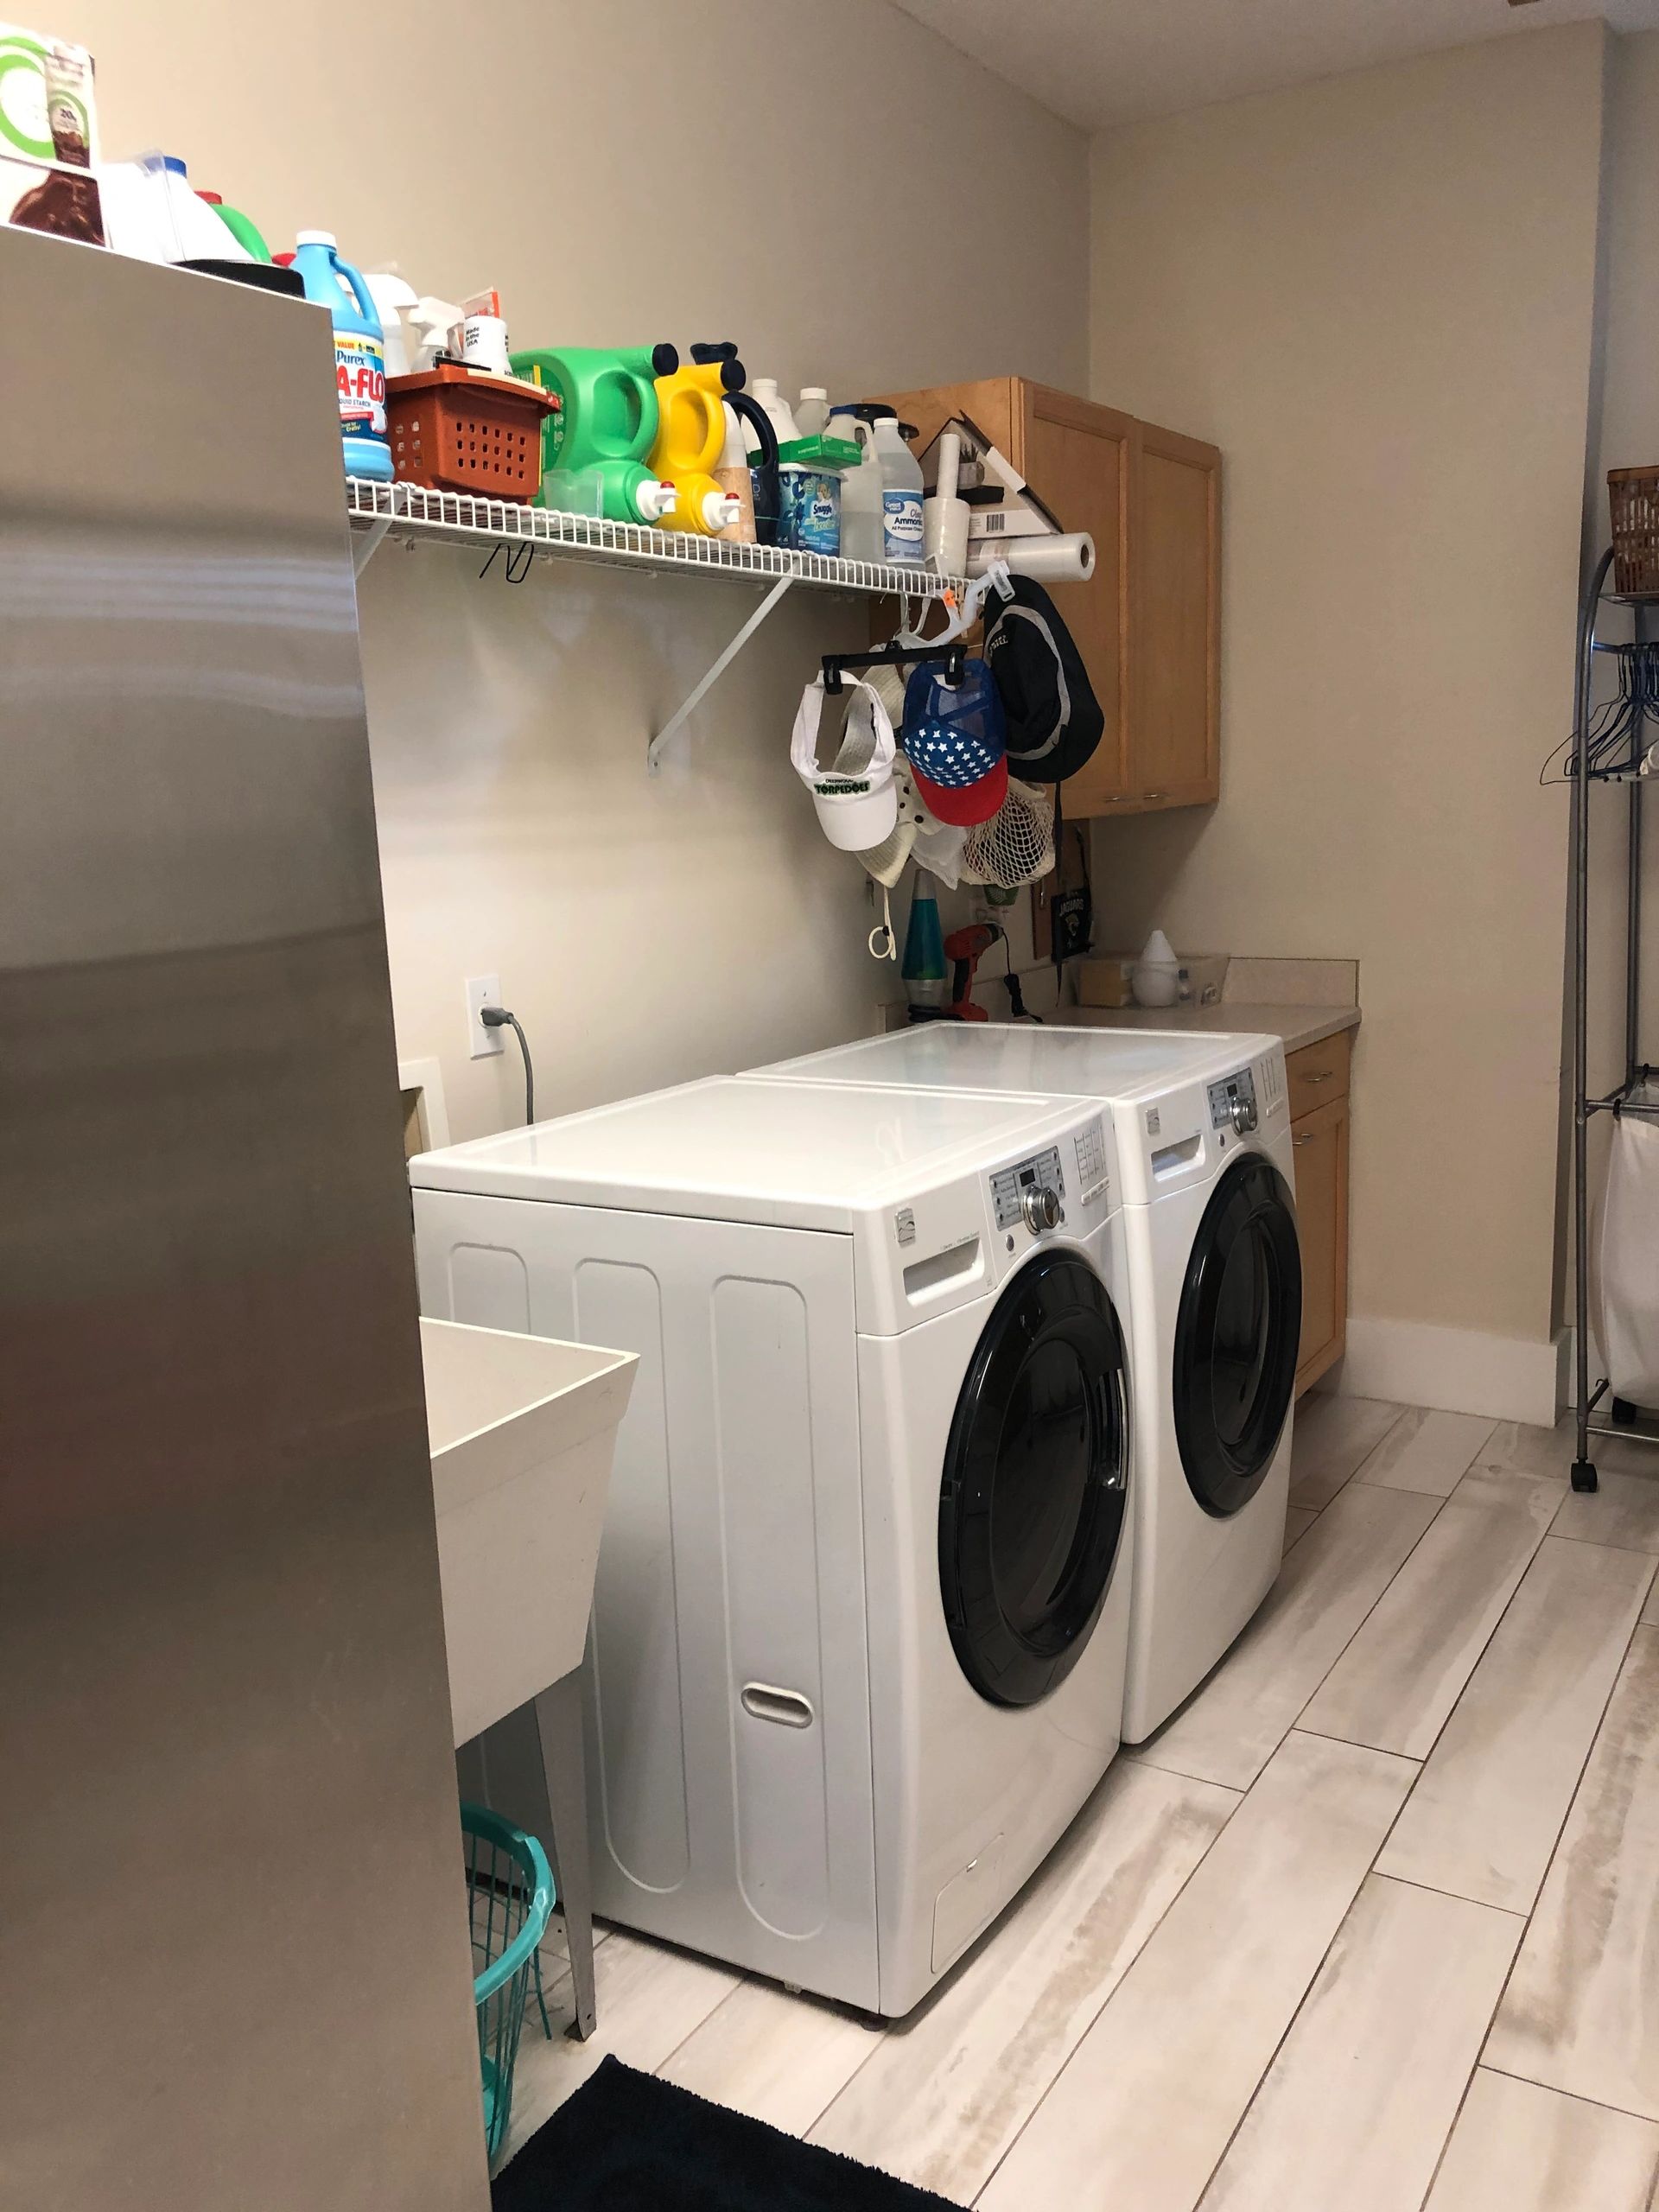 Laundry Room - After organizing 